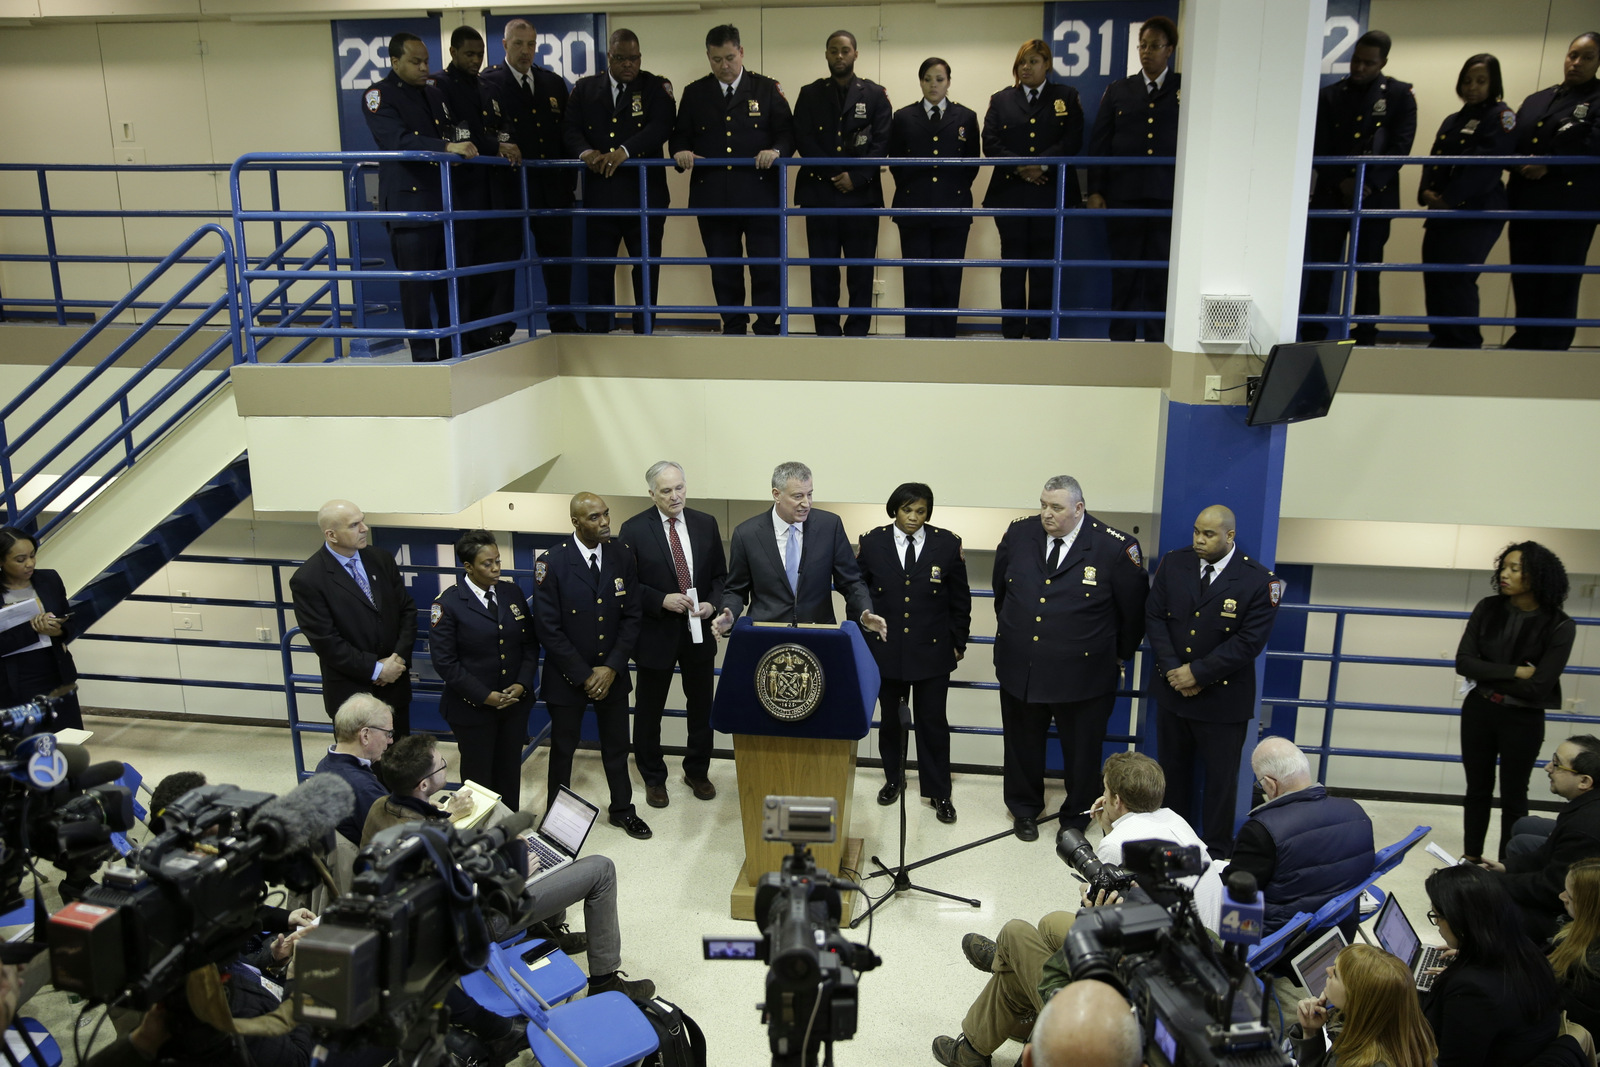 Surrounded by corrections officers, New York City Mayor Bill de Blasio holds a news conference on Rikers Island in New York, March 12, 2015. The mayor unveiled a plan to curb jail violence after a visit to the problem-plagued Rikers Island jail complex. (AP/Seth Wenig)